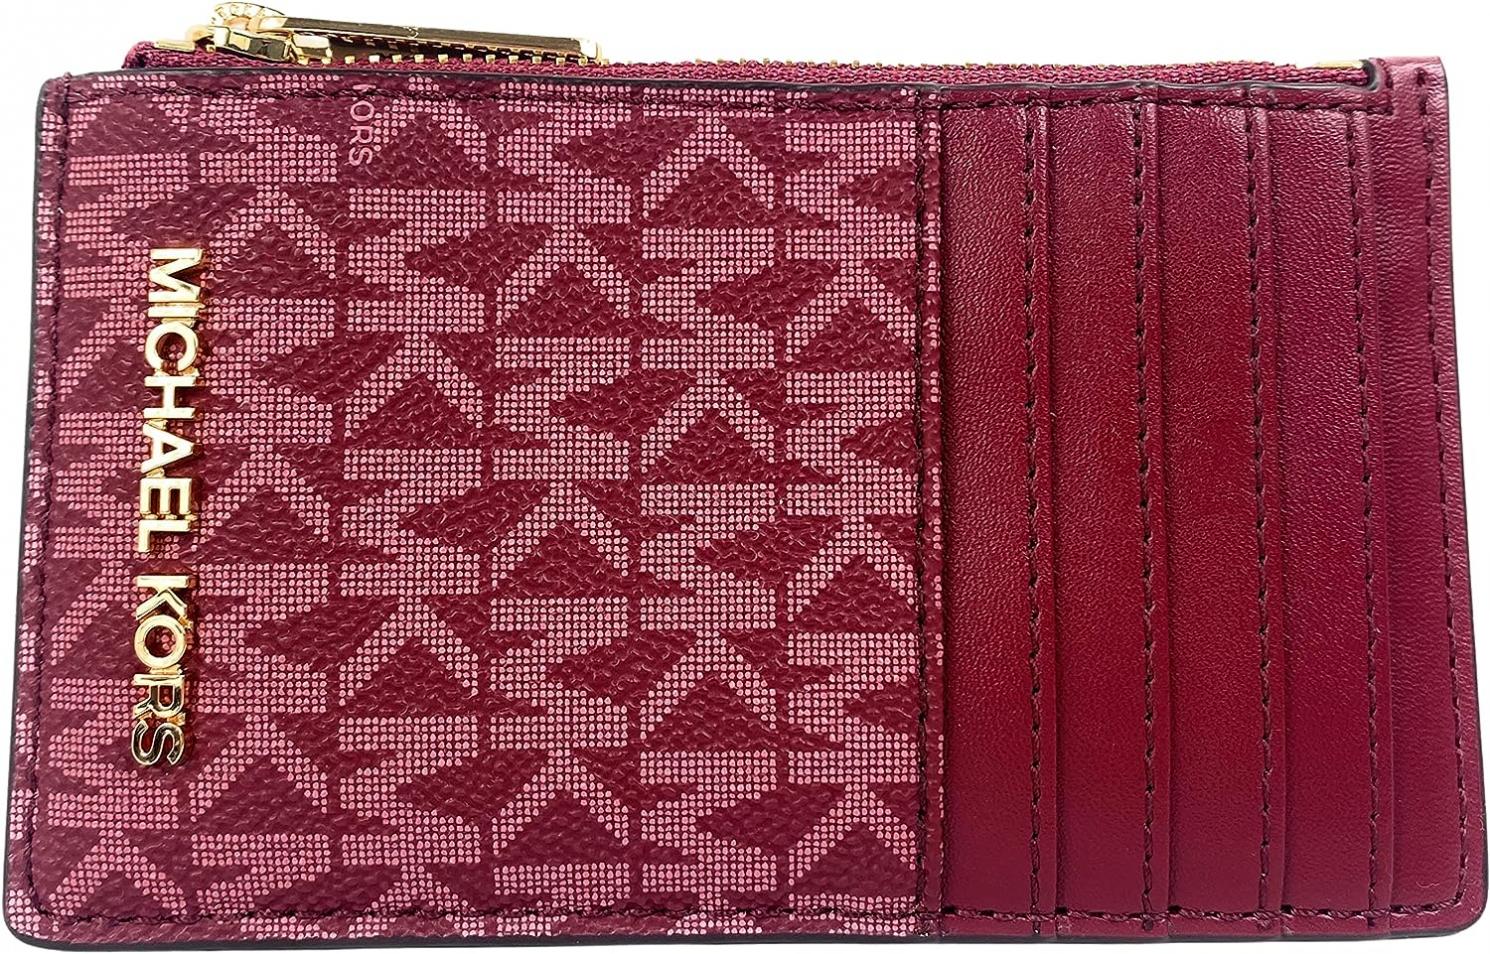 Michael Kors Jet Set Leather Travel Card Case in Mulberry Multi